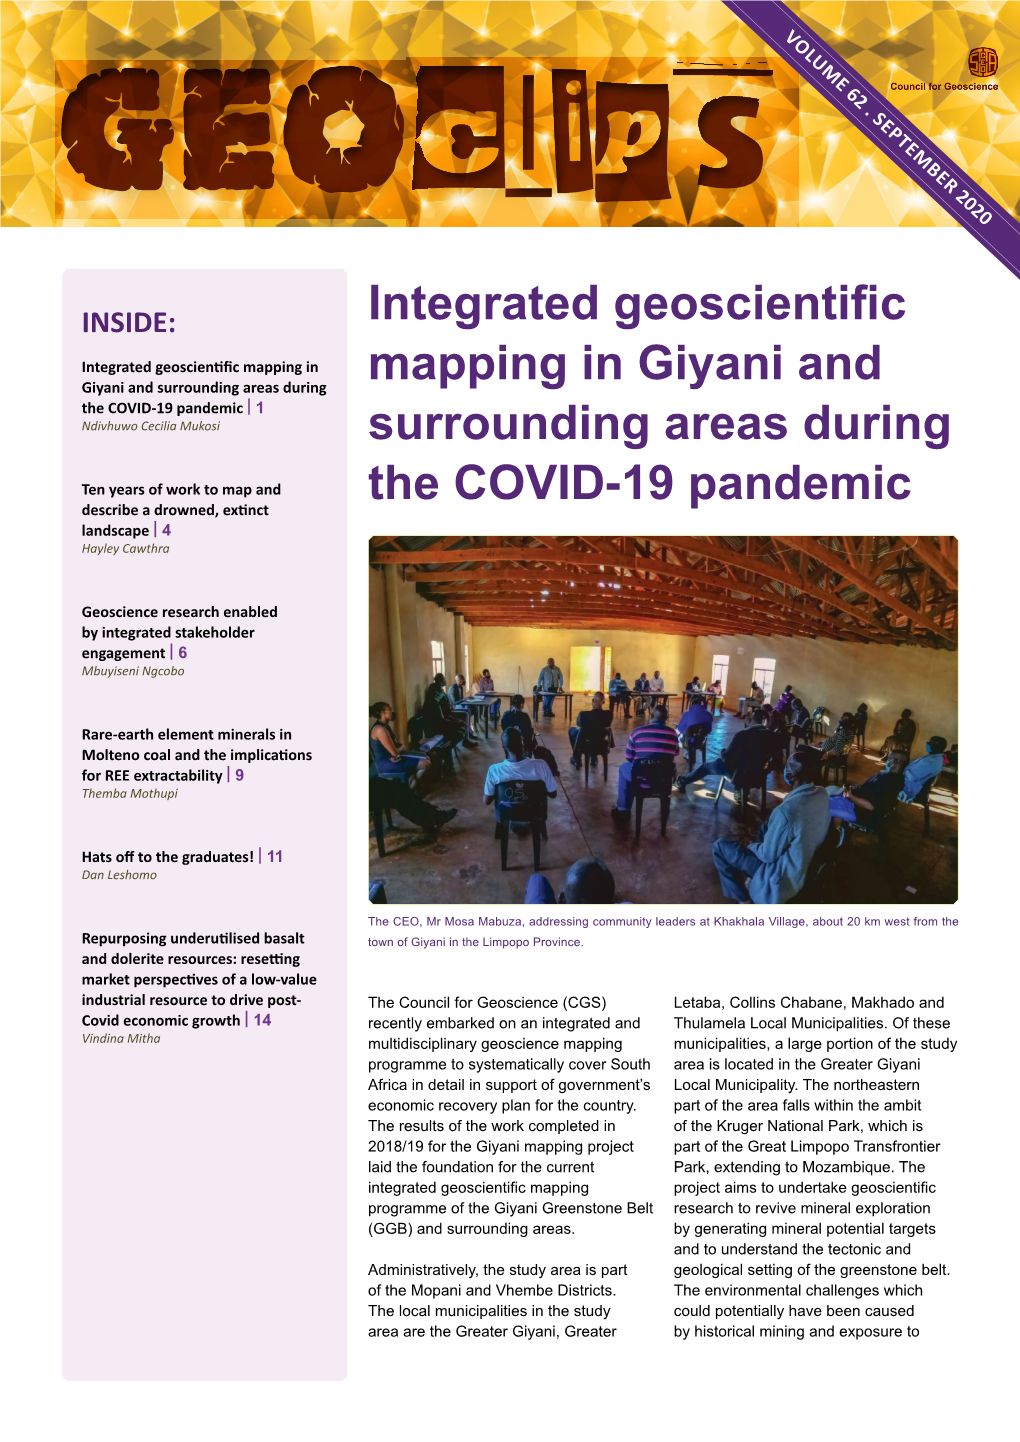 Integrated Geoscientific Mapping in Giyani and Surrounding Areas